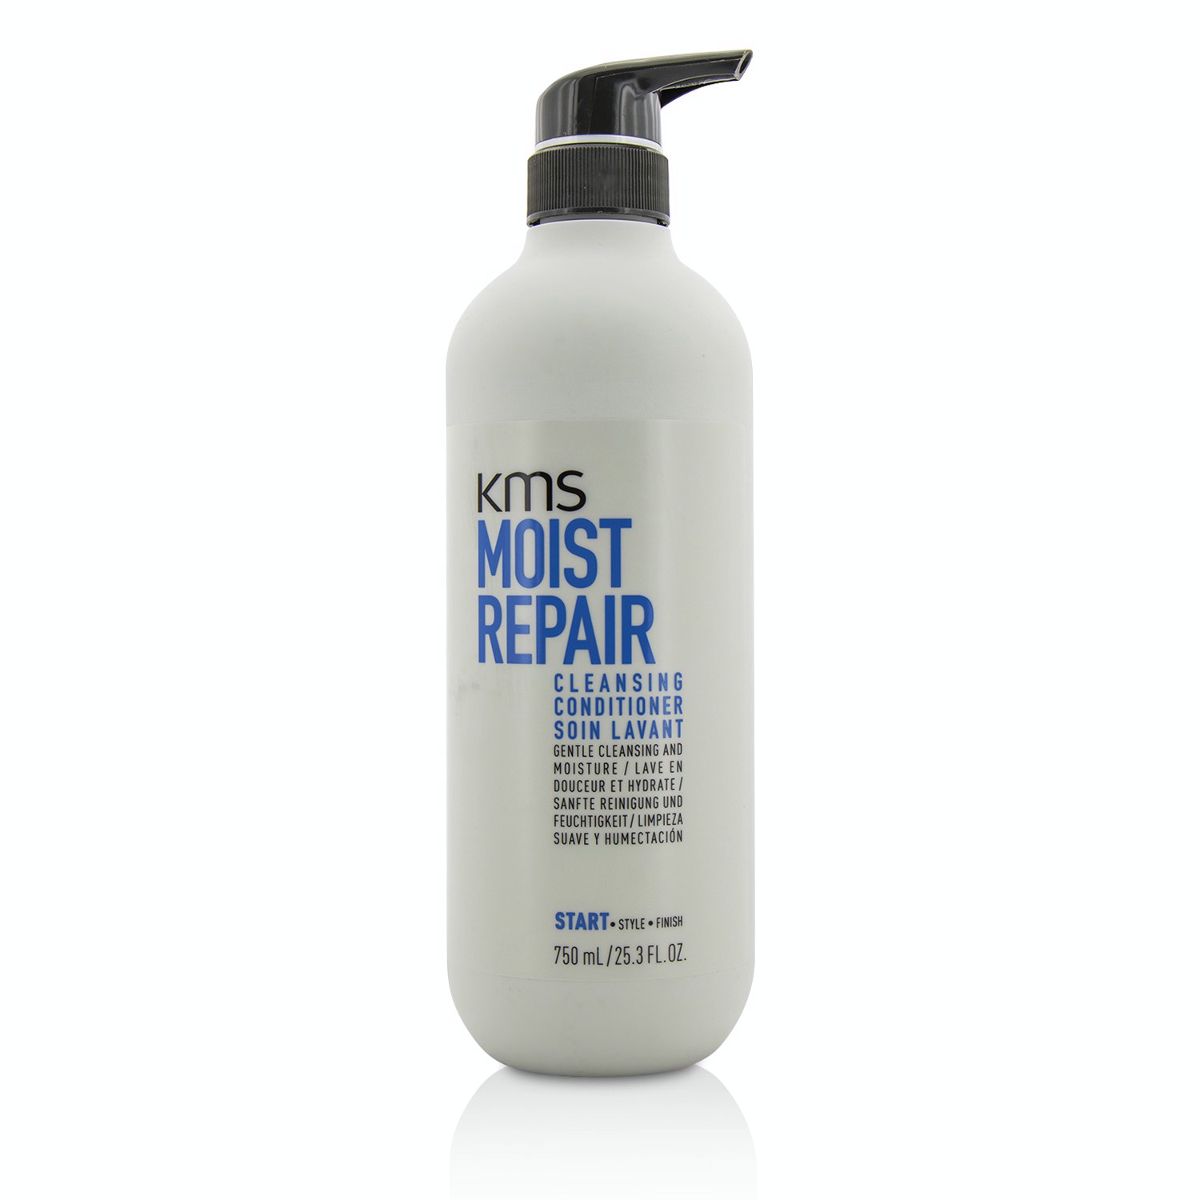 Moist Repair Cleansing Conditioner (Gentle Cleansing and Moisture) KMS California Image